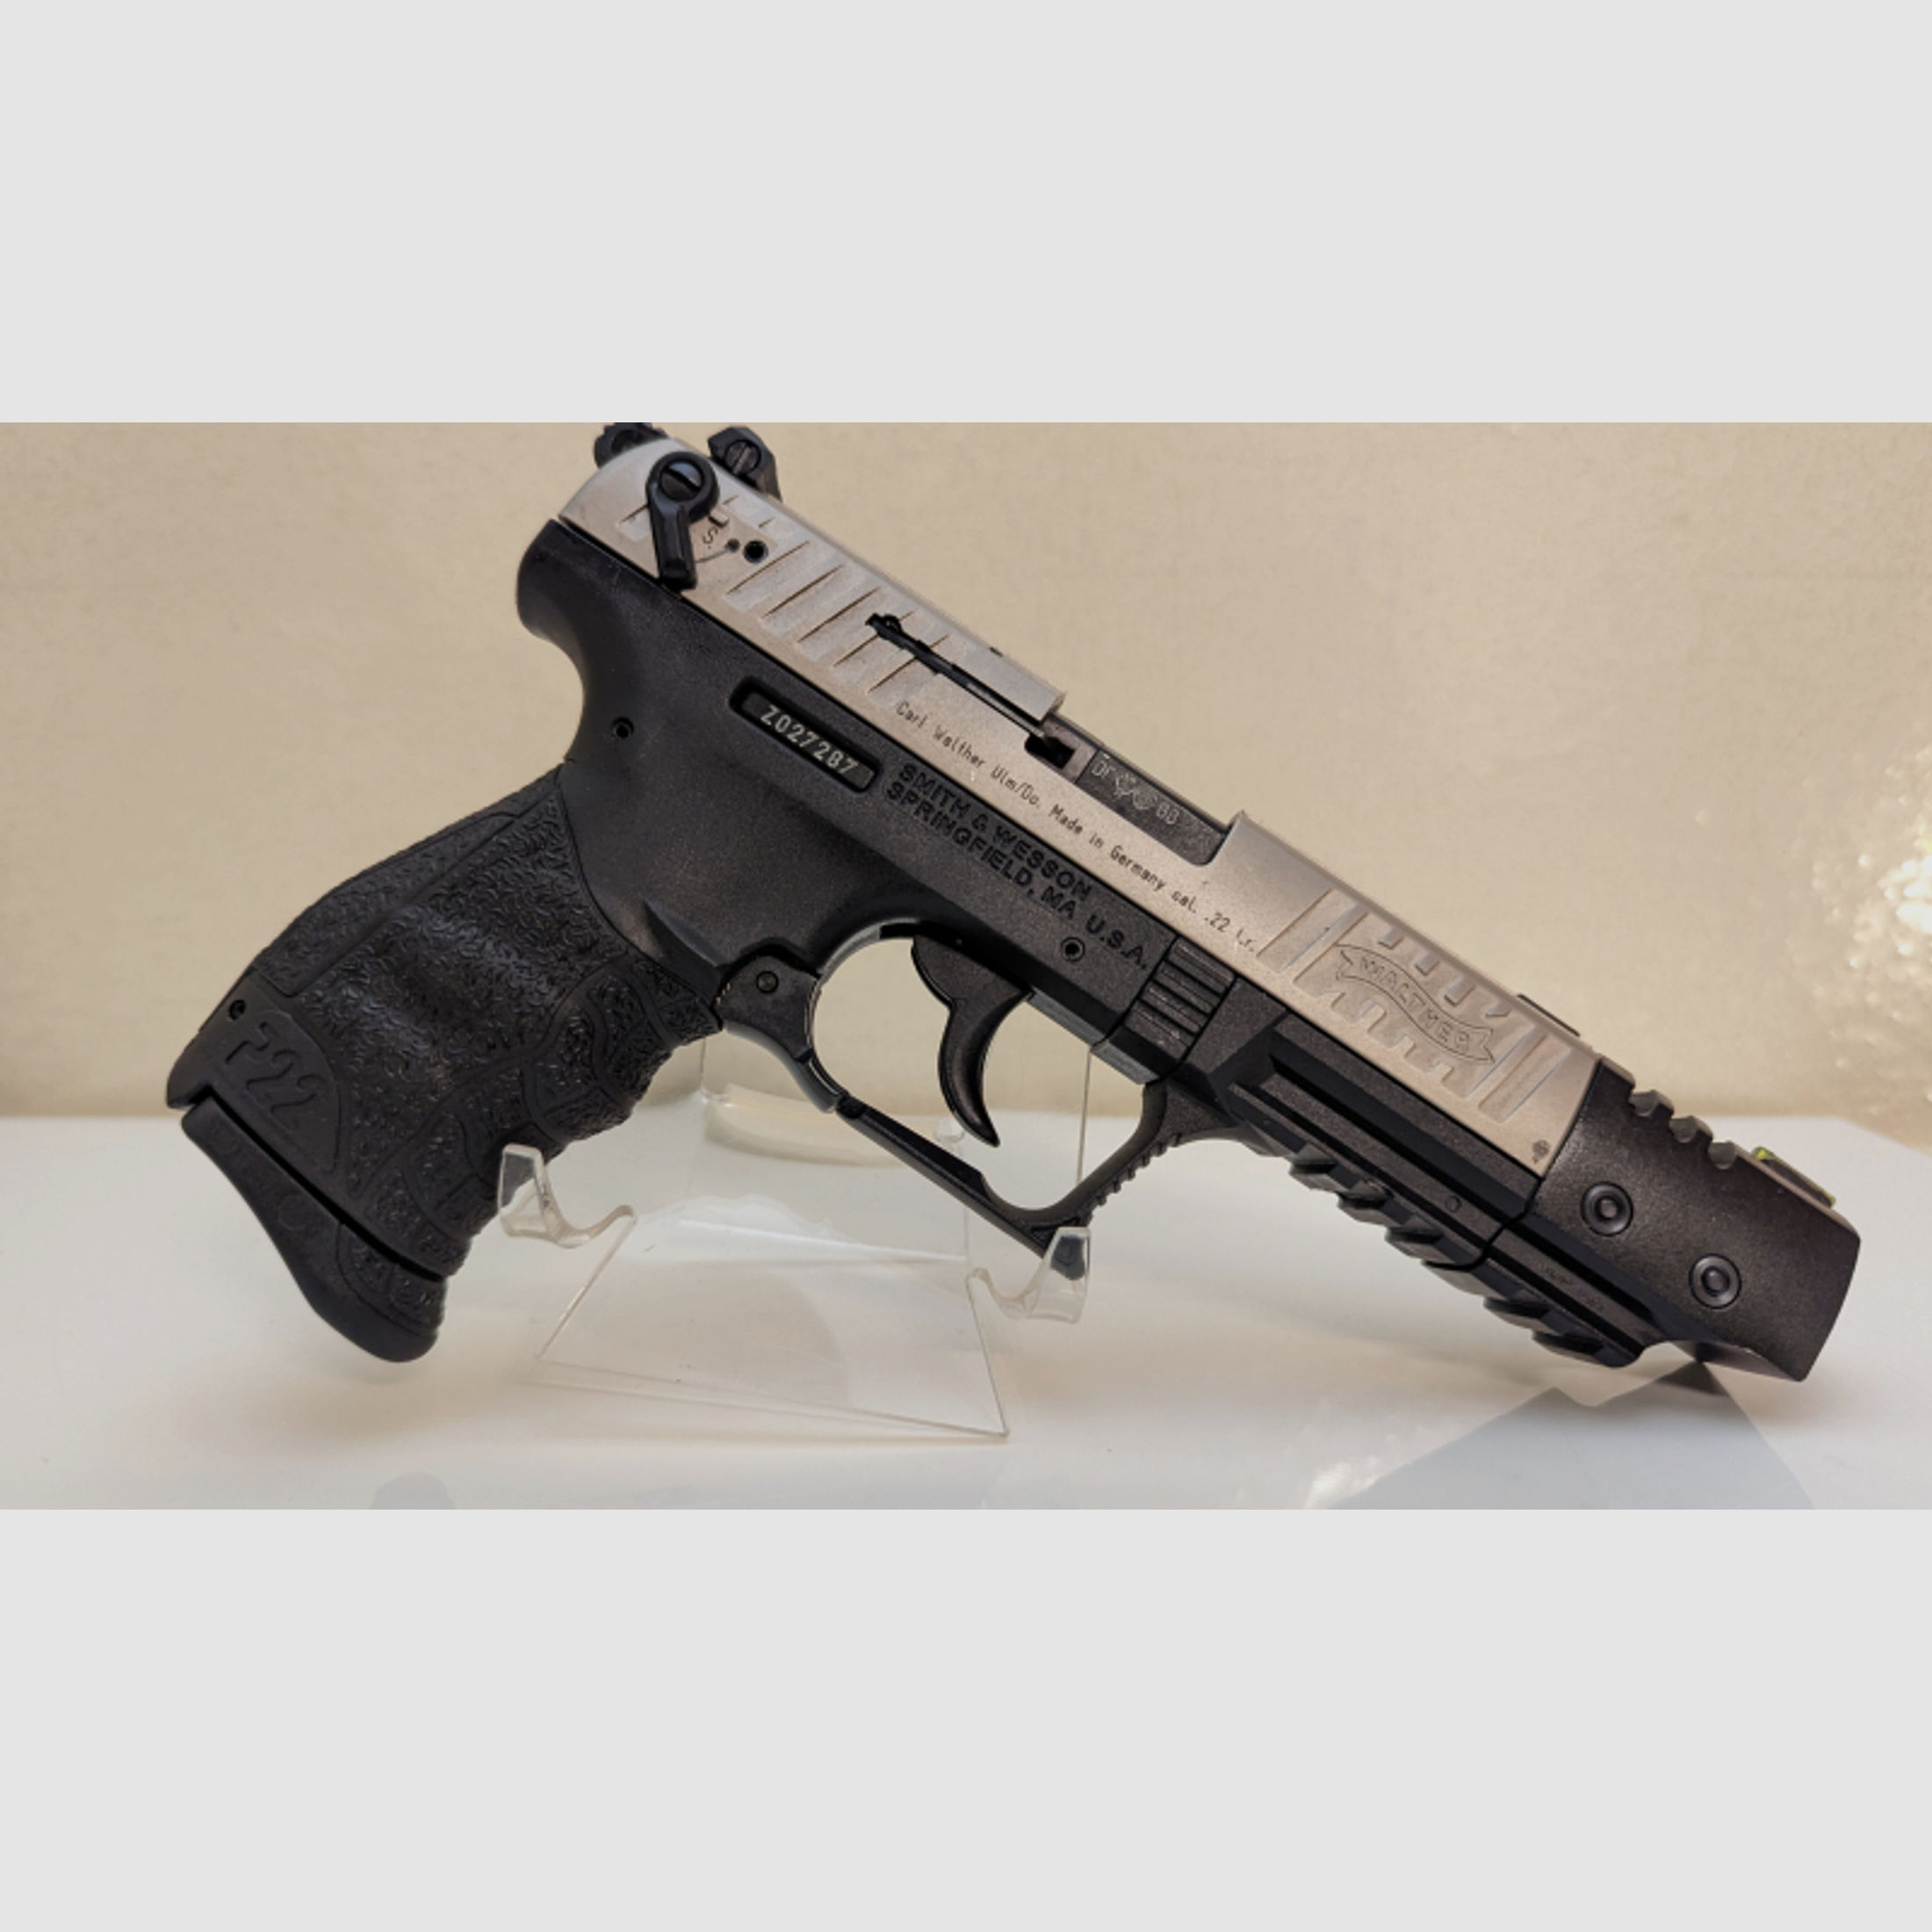 Walther P22 in 22lr 5"Zoll Lauf